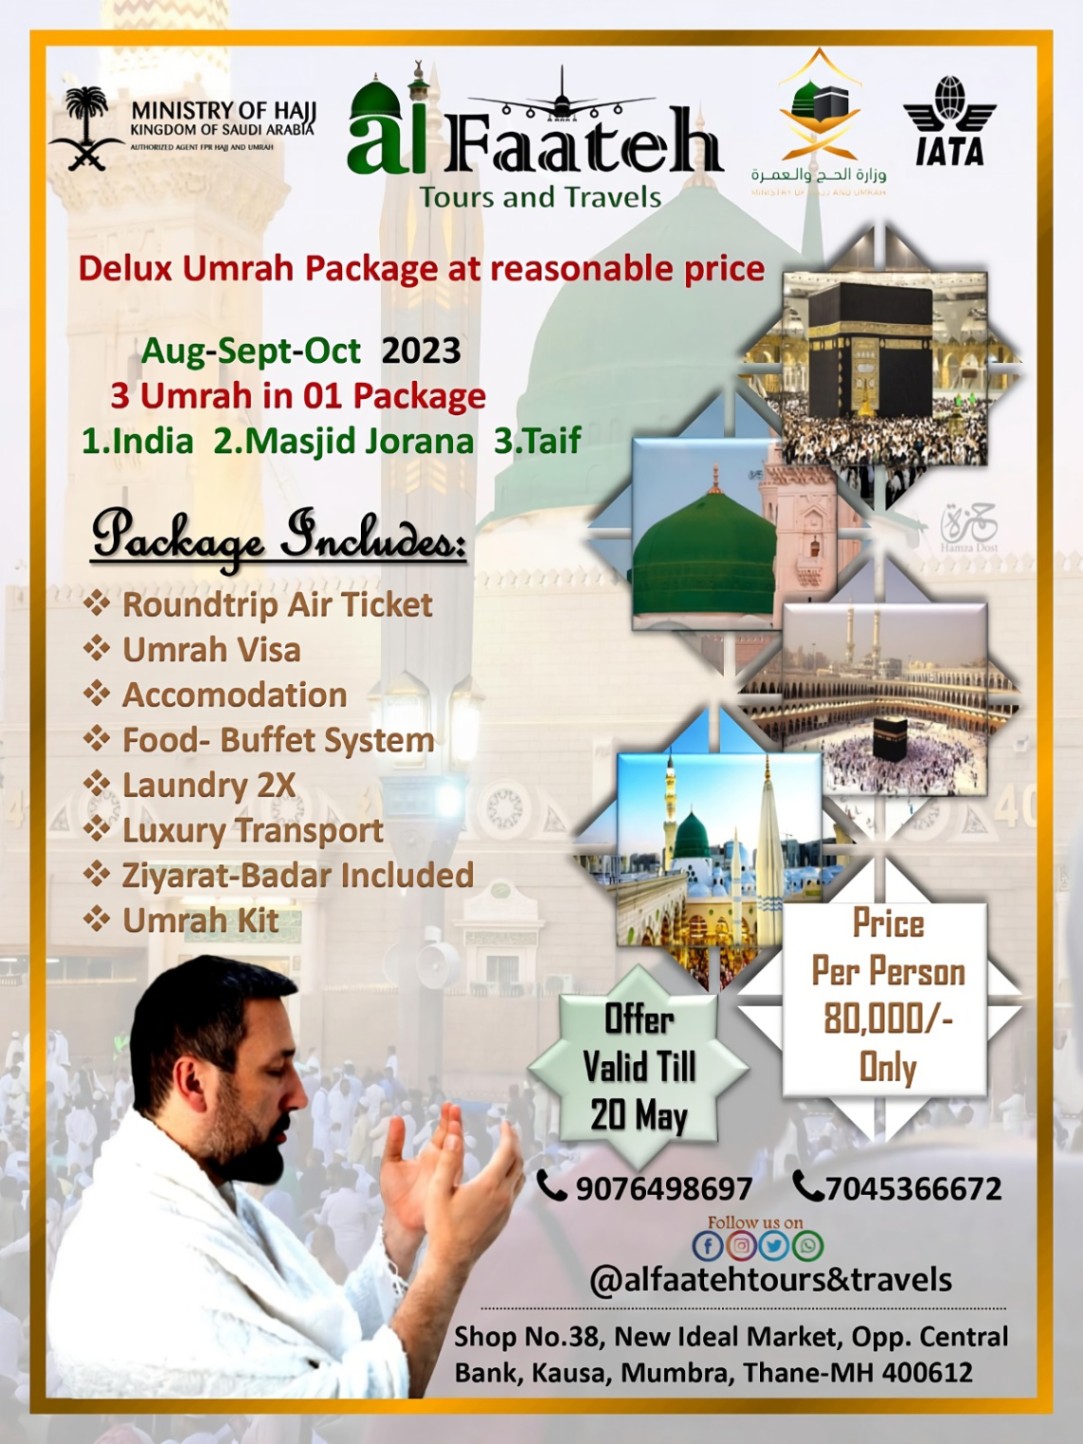 Flight Tickets, International Tour, Pilgrimage Tour; Exp: Some experience (0-1 years)